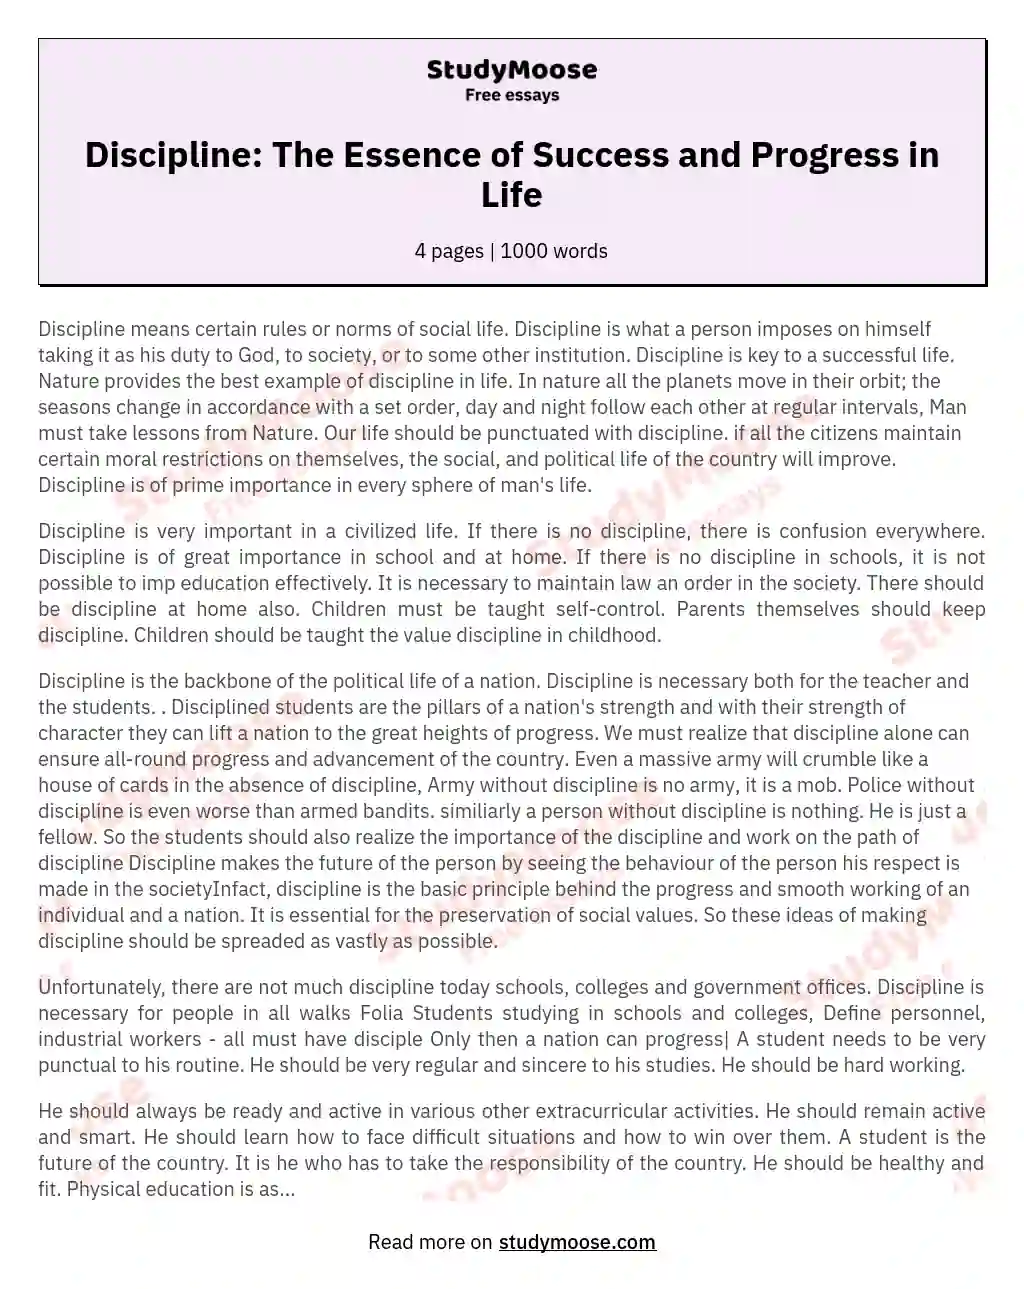 Discipline: The Essence of Success and Progress in Life essay